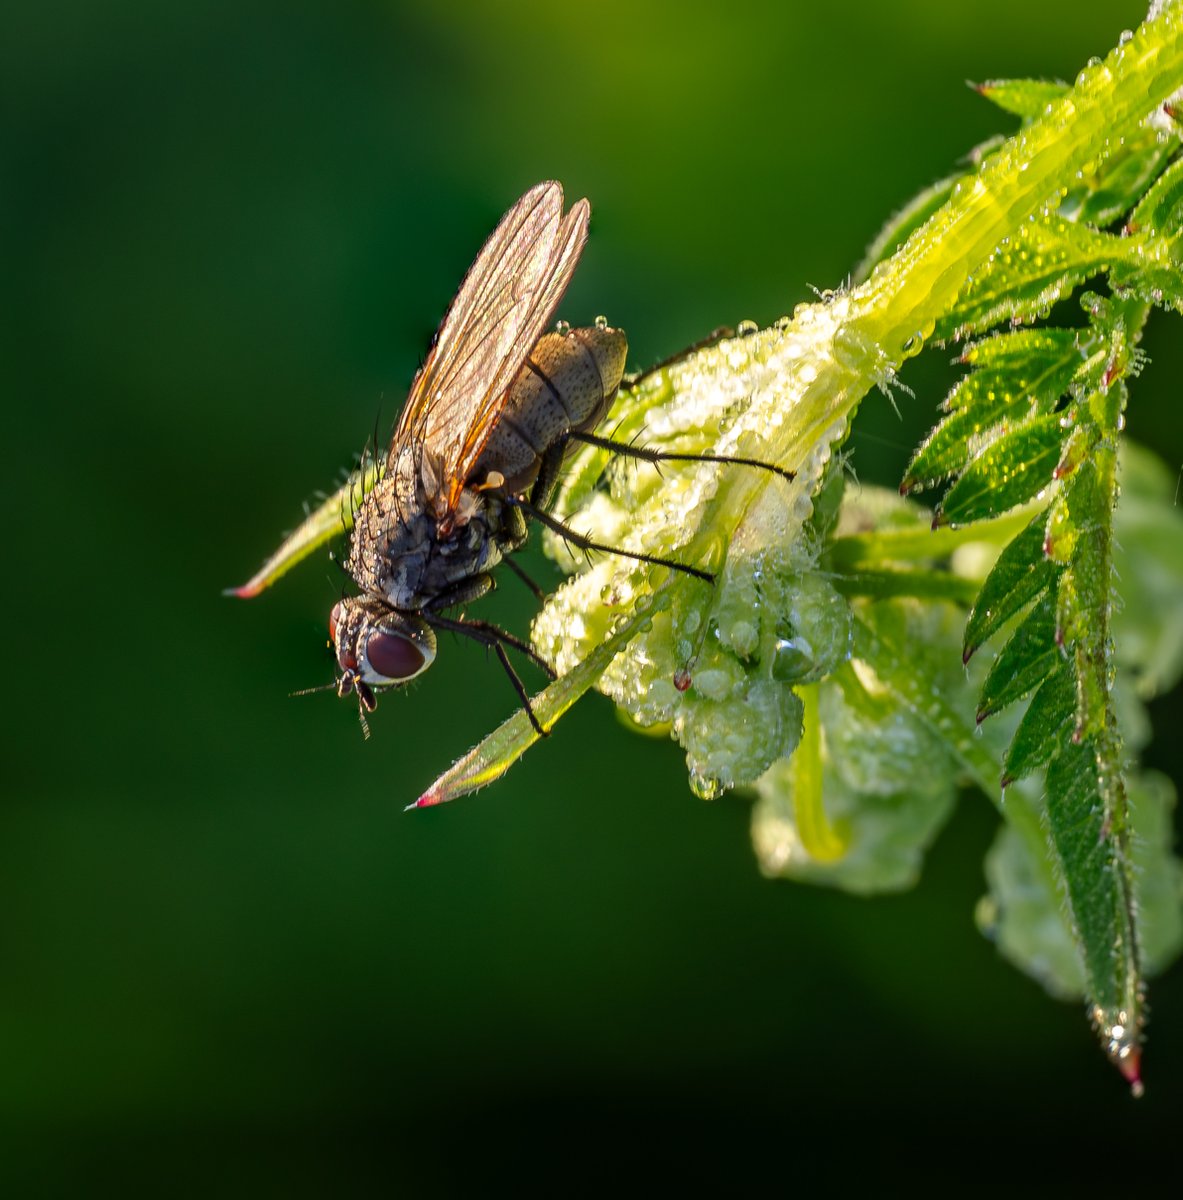 A Fly on dewy Cow Parsley. #Flyday #FlyFriday #Fly #Macro #MacroHour